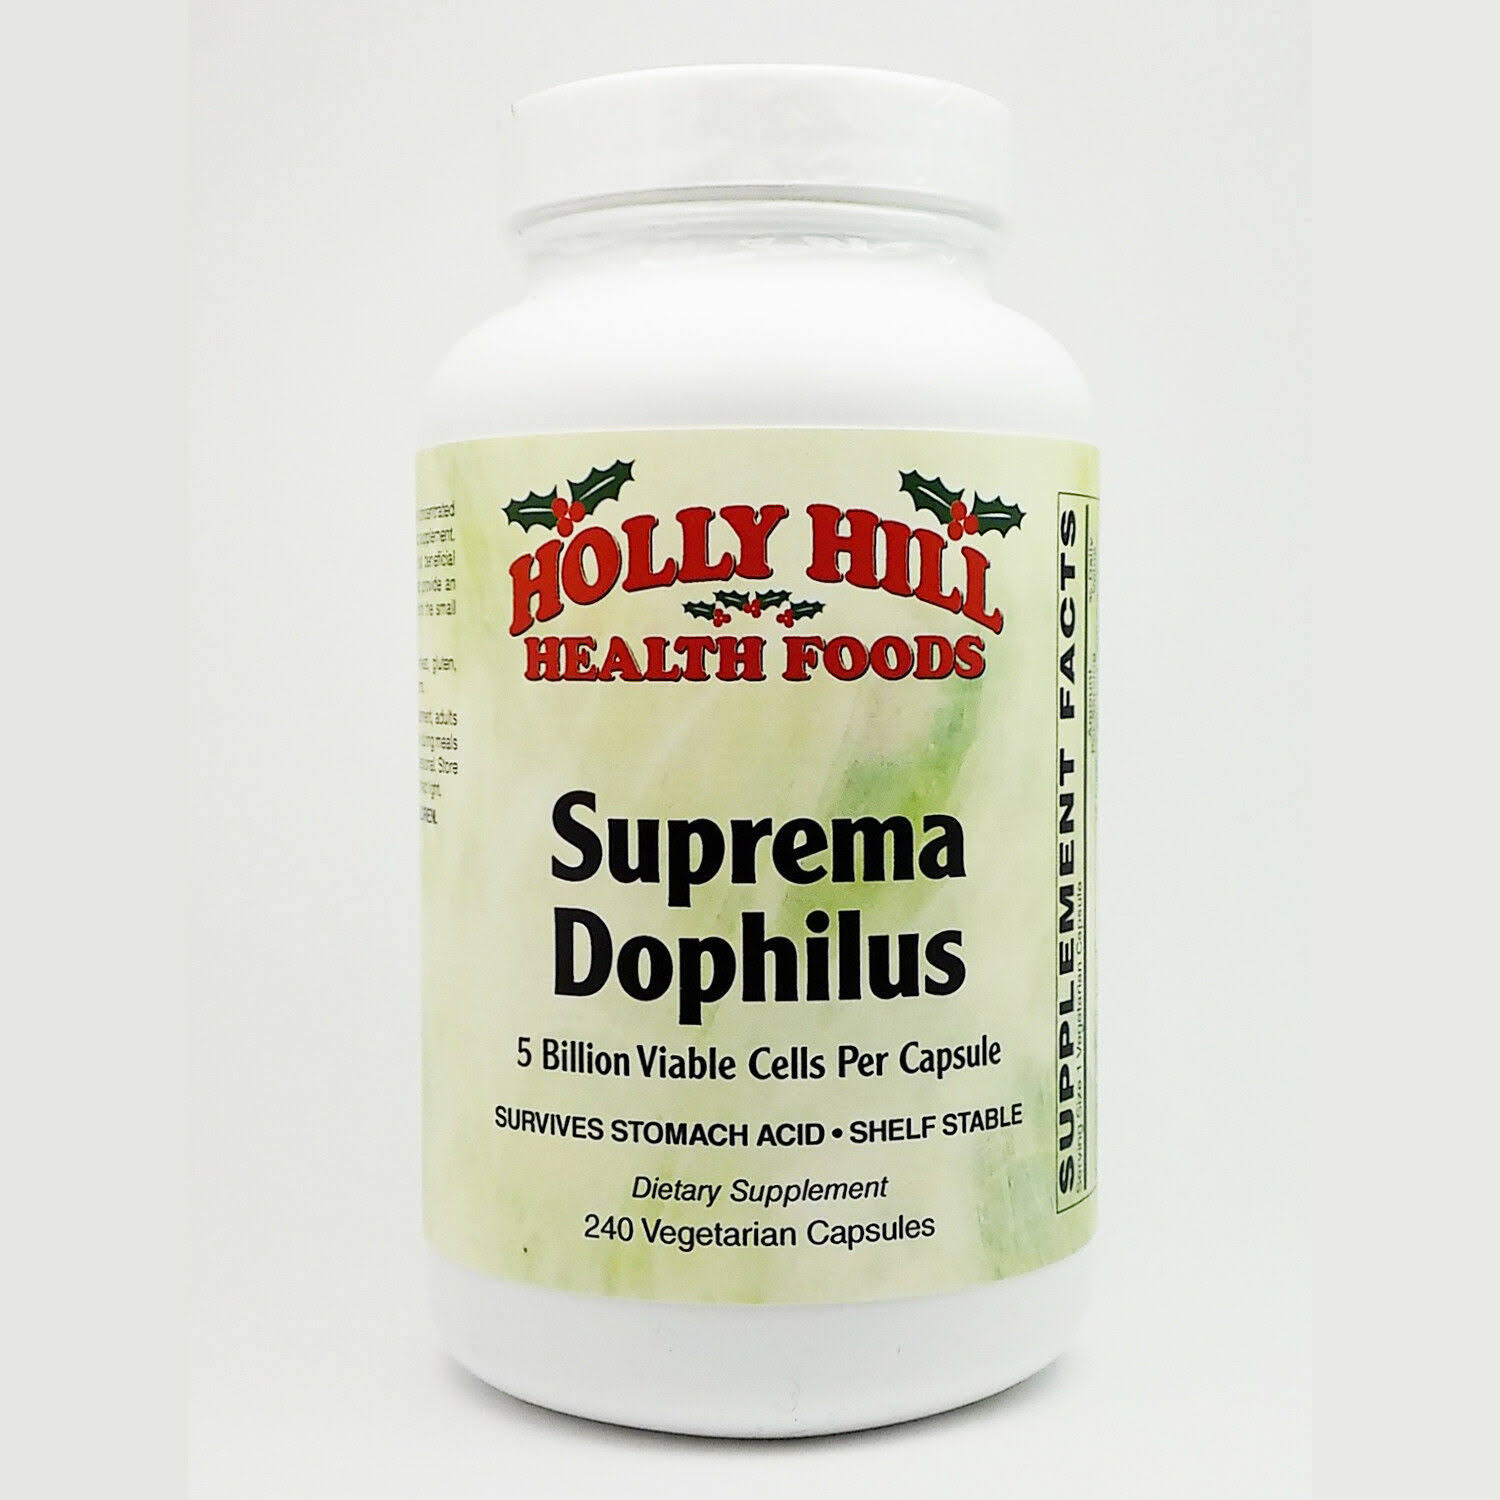 Holly Hill Health Foods, Suprema Dophilus, 240 Vegetarian Capsules